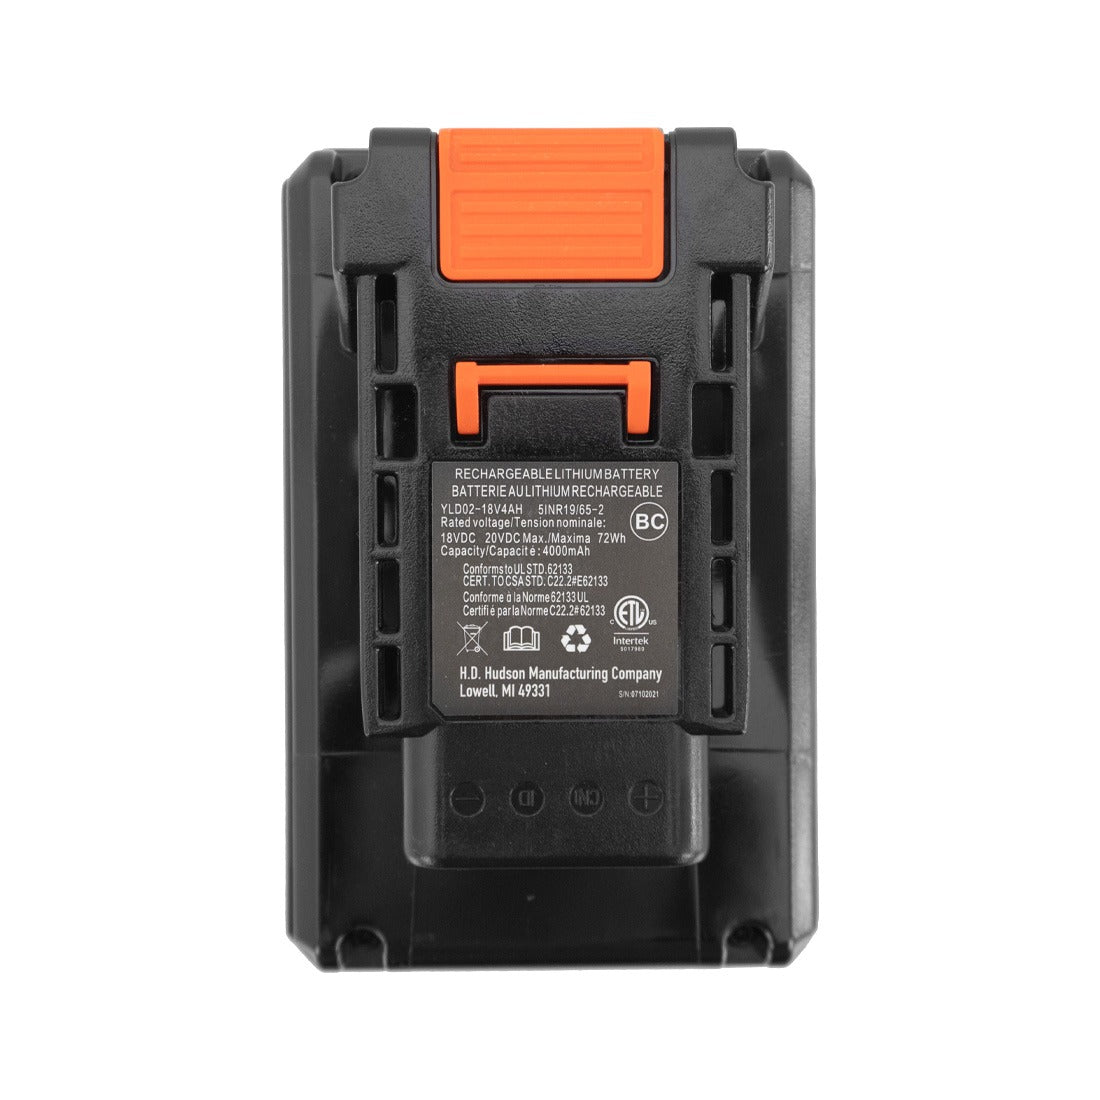 New Replacement Lithium Battery Charger For Black&Decker For